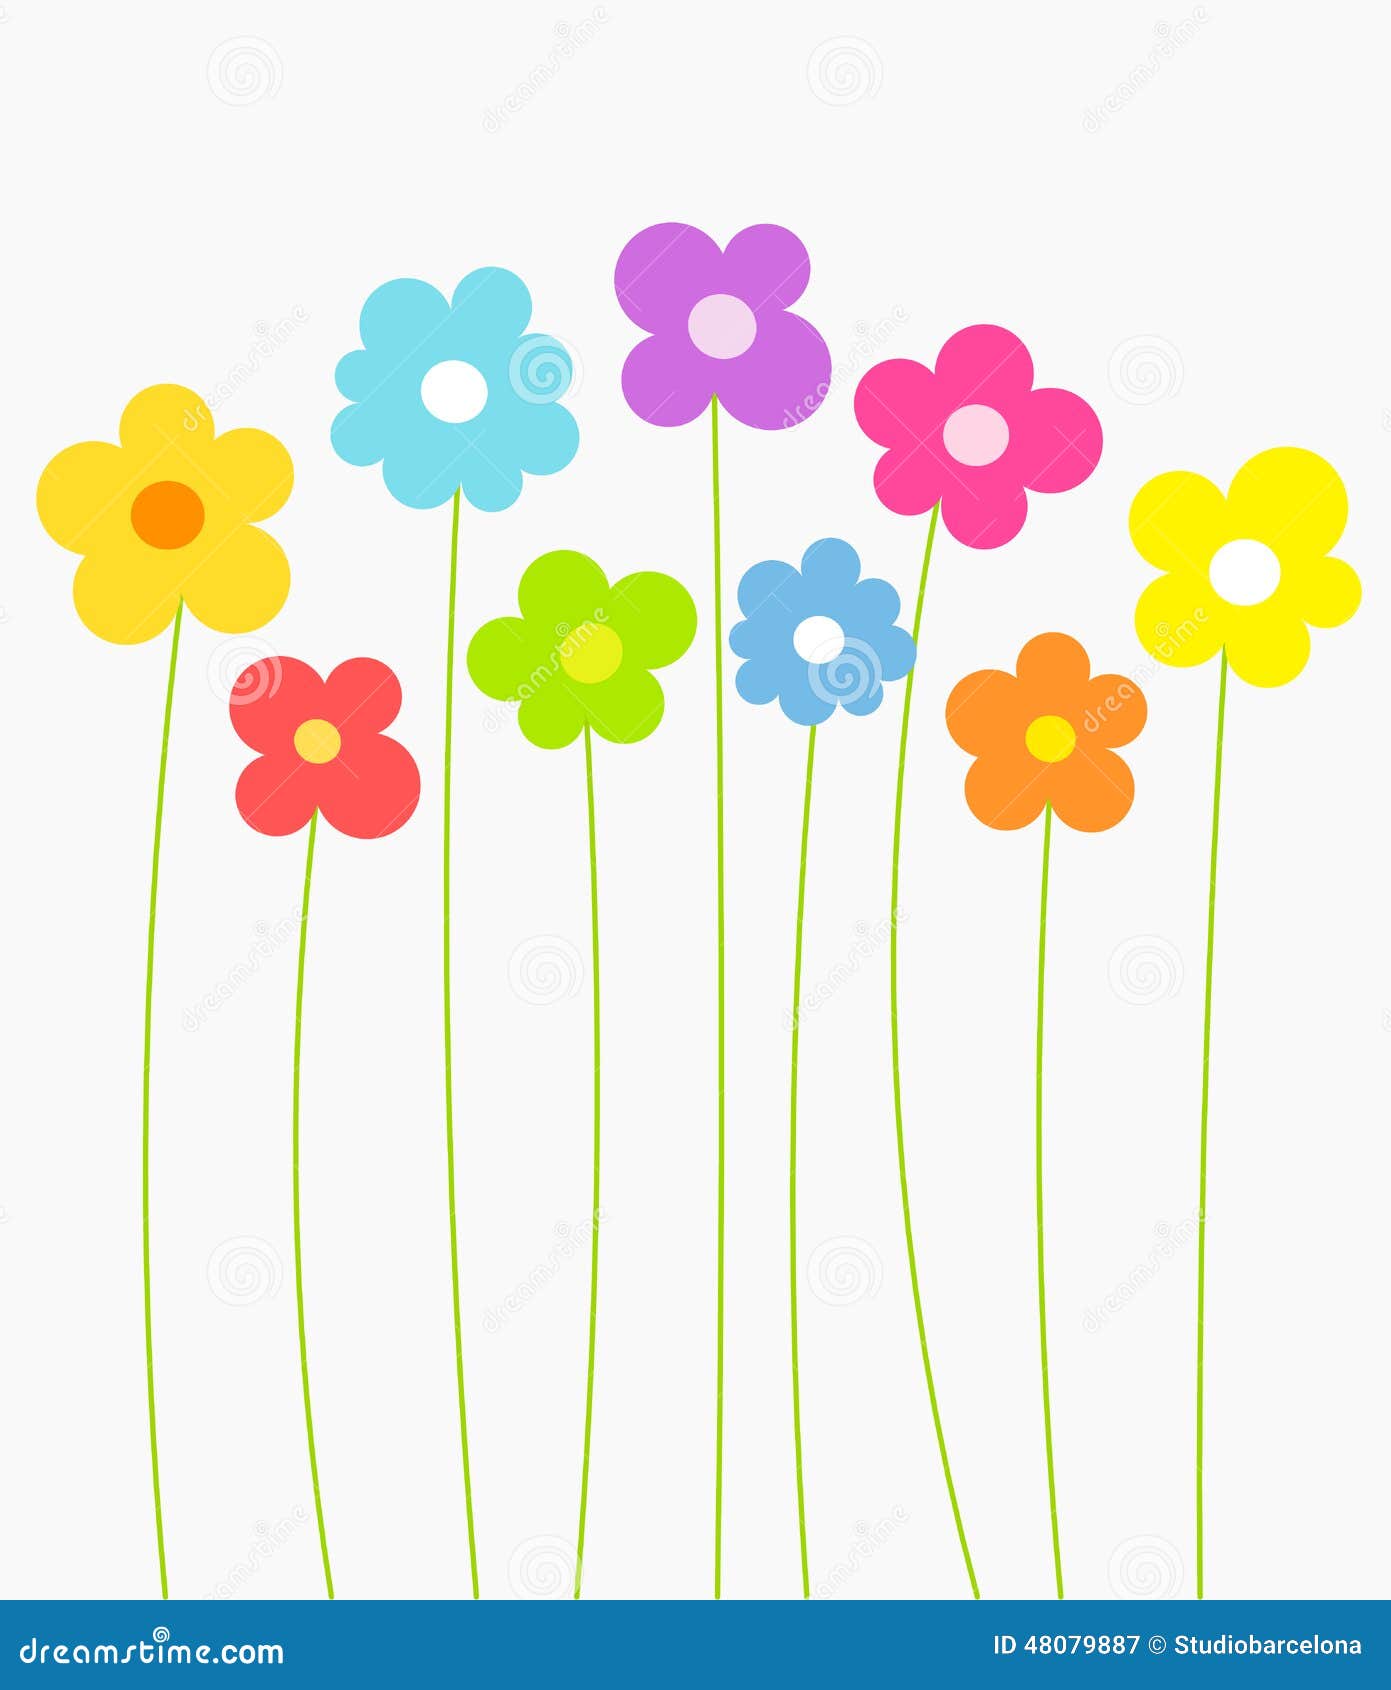 Cute flowers stock vector. Illustration of growing, cute - 48079887